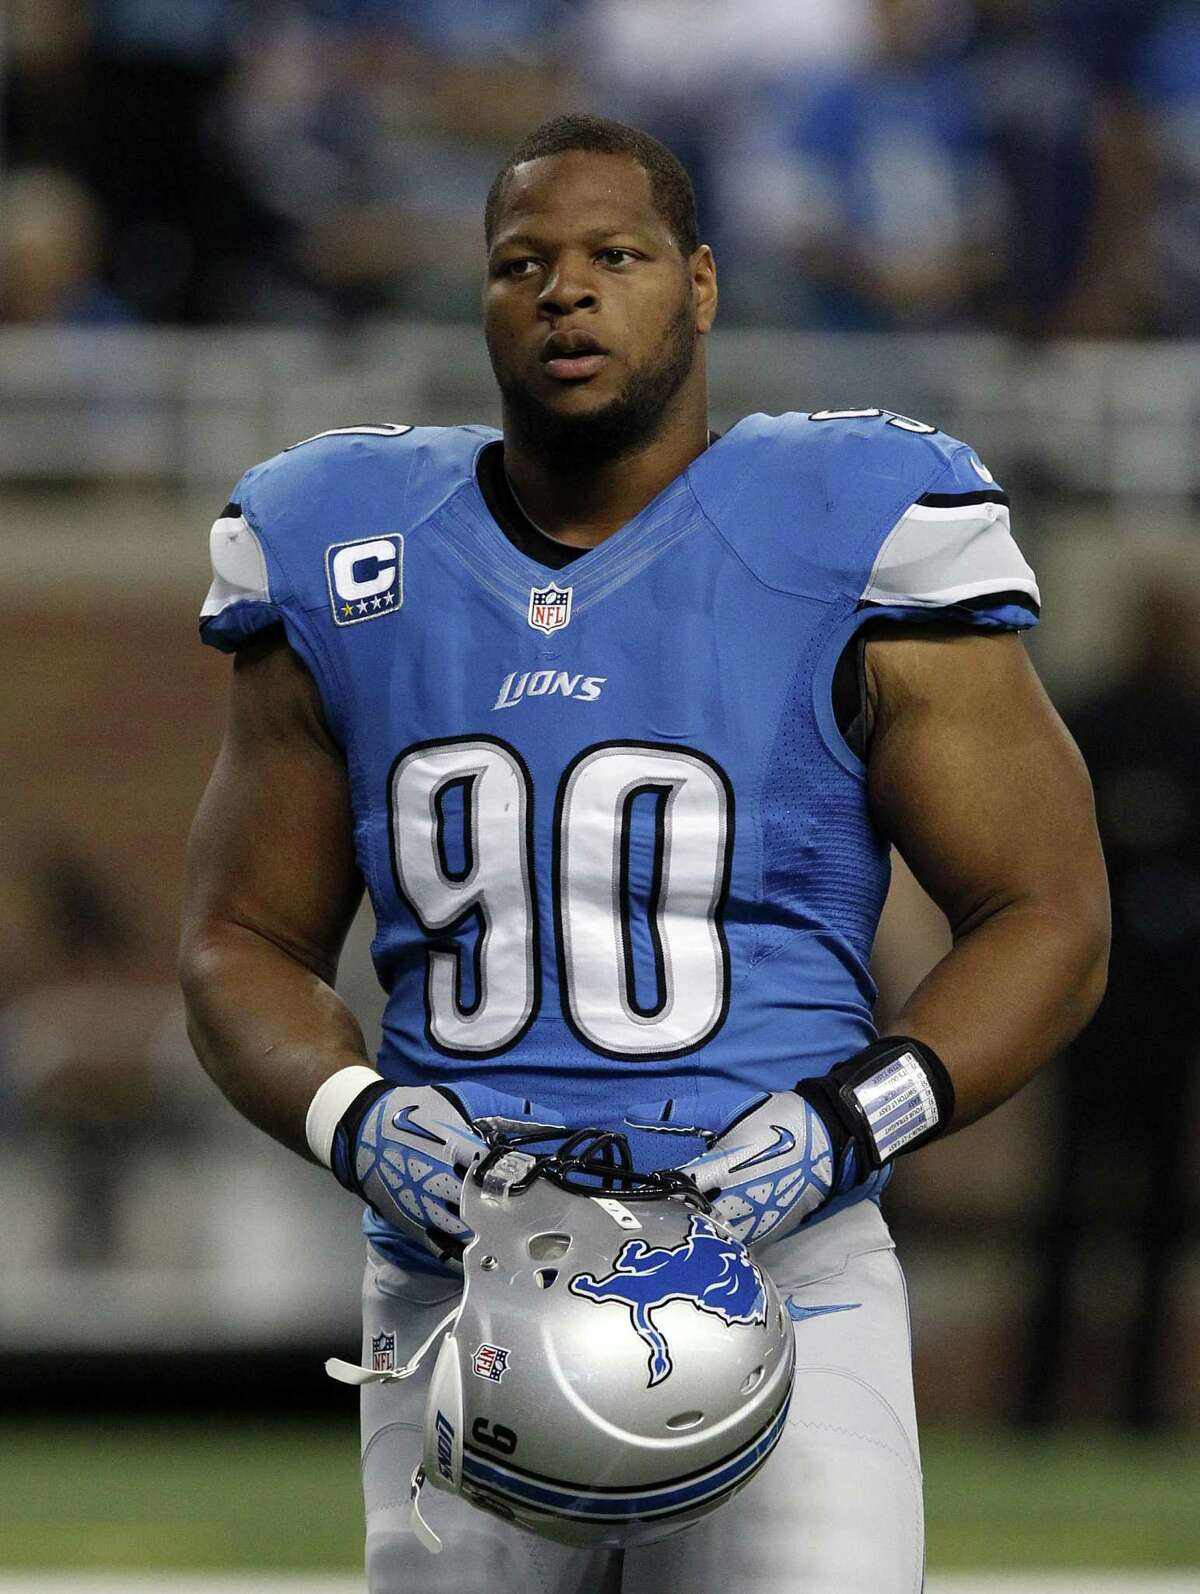 The fine of the Lions' Ndamukong Suh might be the NFL's largest ever for an on-field violation.